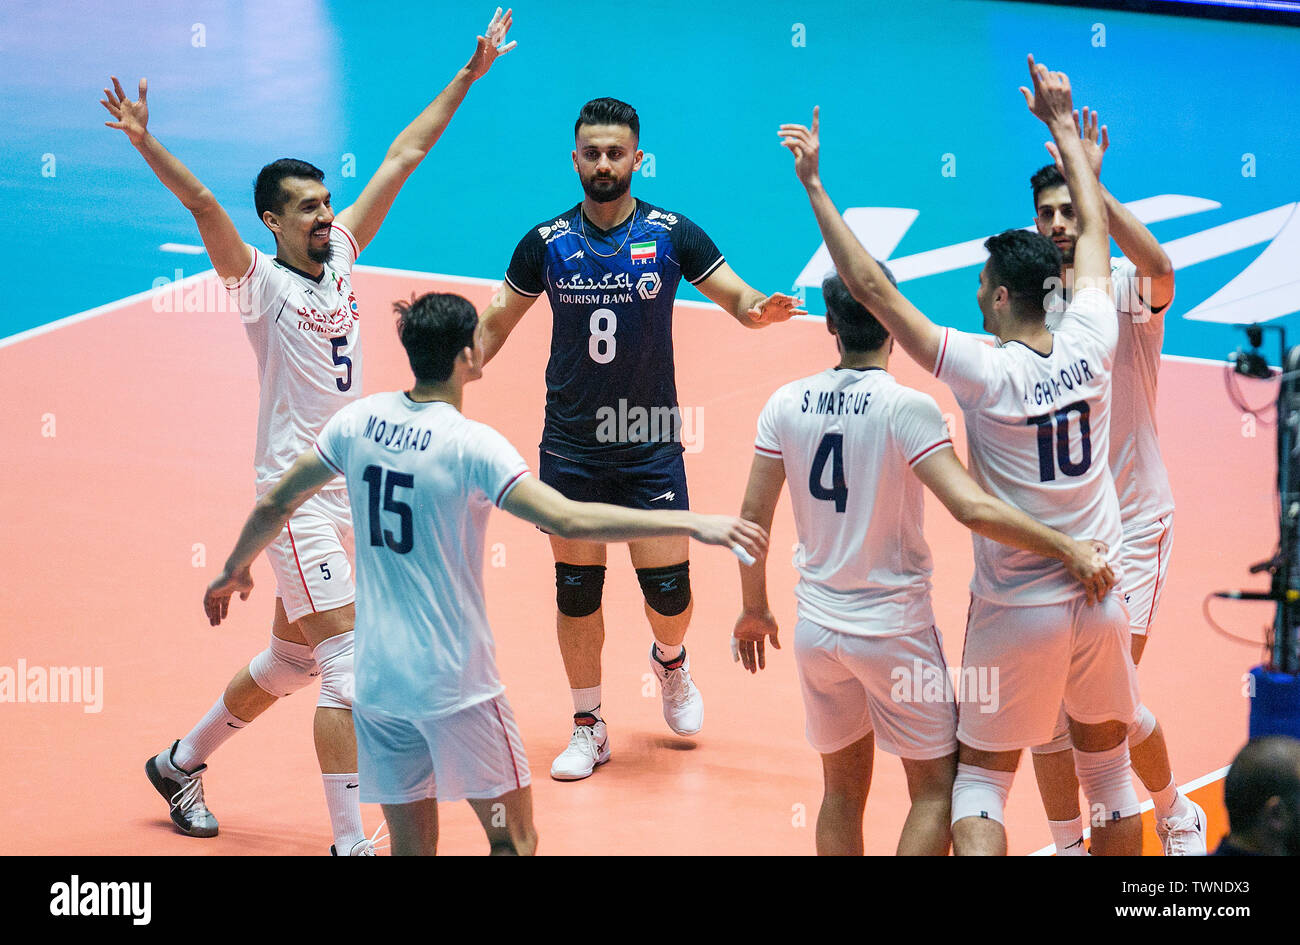 Ardabil, Iran. 21st June, 2019. Trent Odea (R) of Australia spikes the ball  during the FIVB Volleyball Nations League match between France and  Australia in Ardabil, Iran, June 21, 2019. Credit: Ahmad